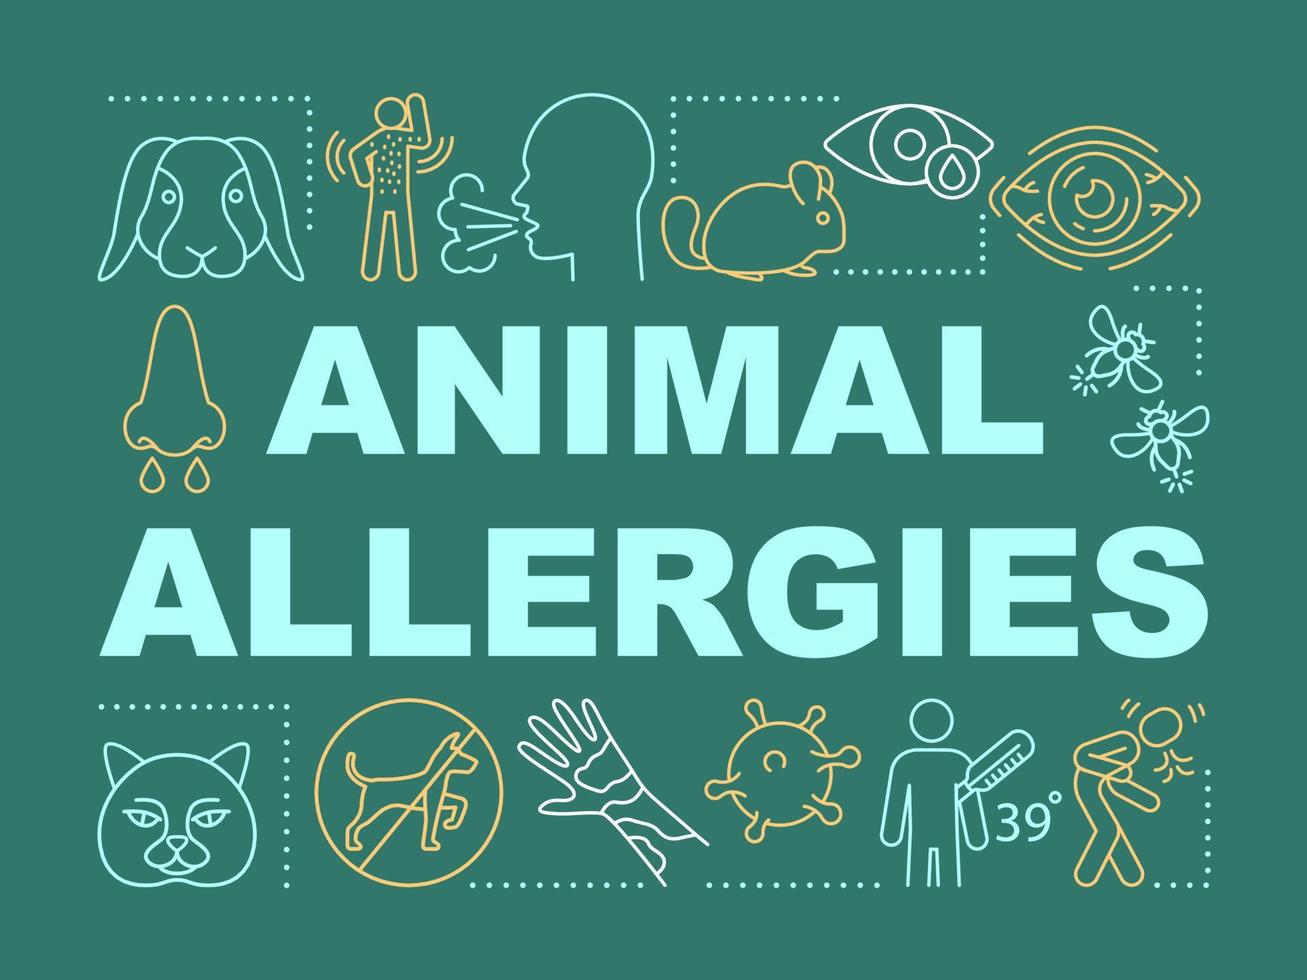 Animal allergies word concepts banner. Allergic reaction to insect stings, pets fur, saliva, dander. Presentation, website. Isolated lettering typography idea with icons. Vector outline illustration